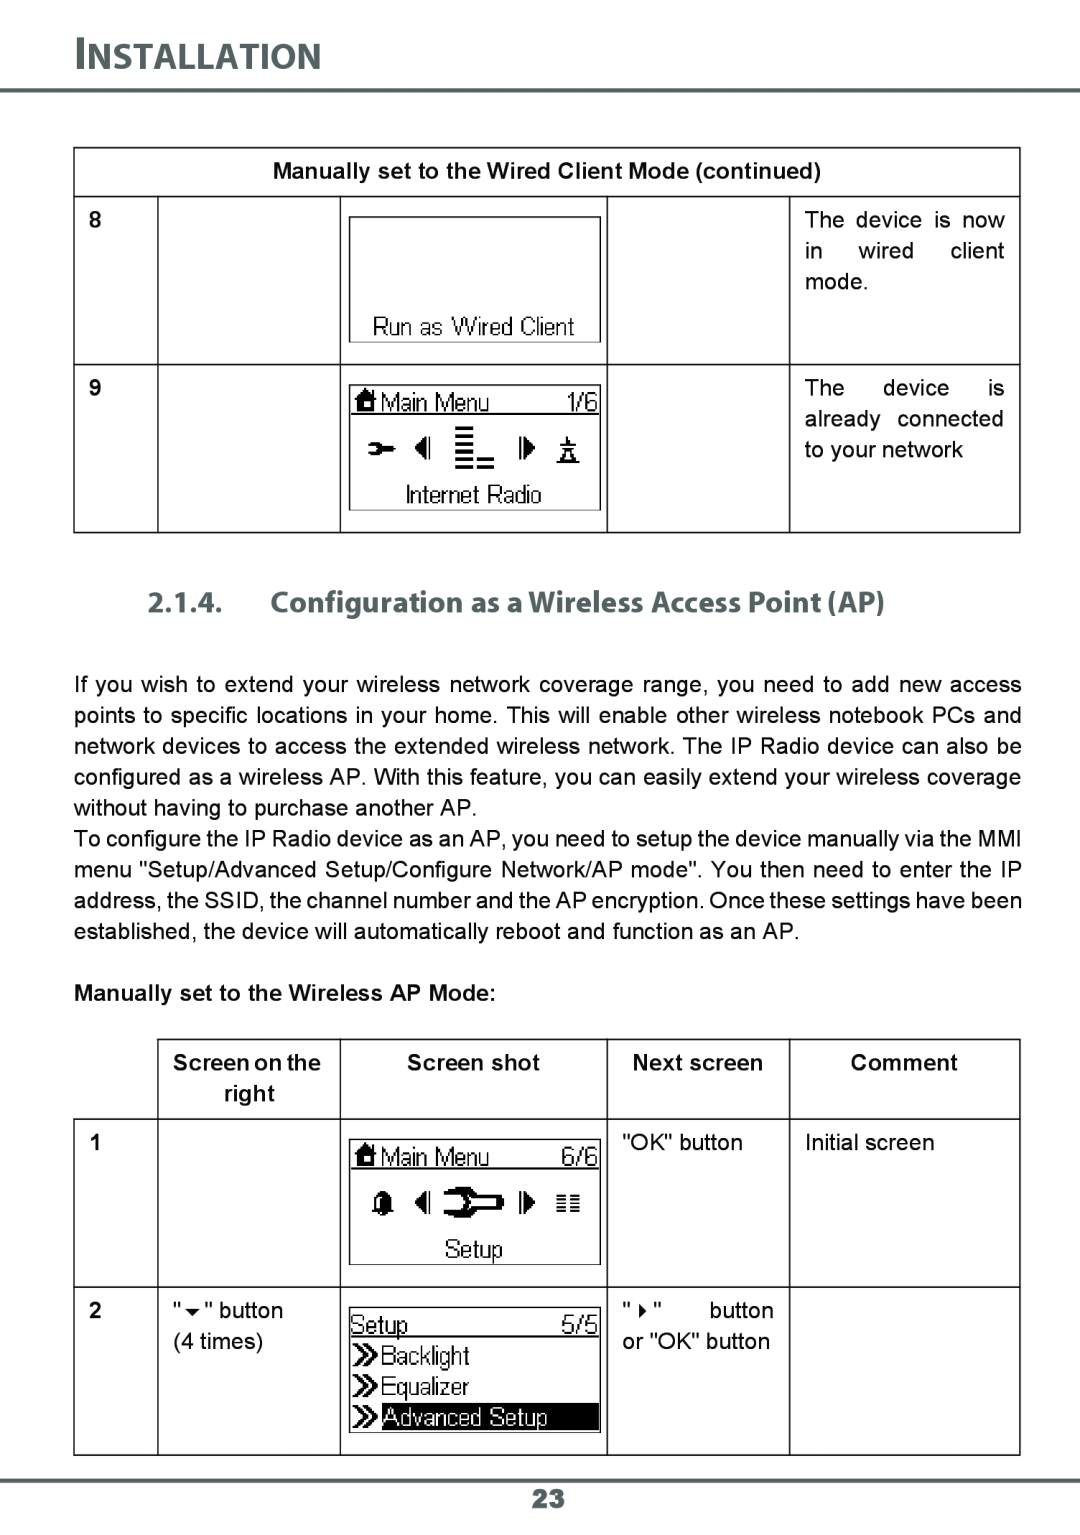 Sagem 700 manual Configuration as a Wireless Access Point AP, Installation 